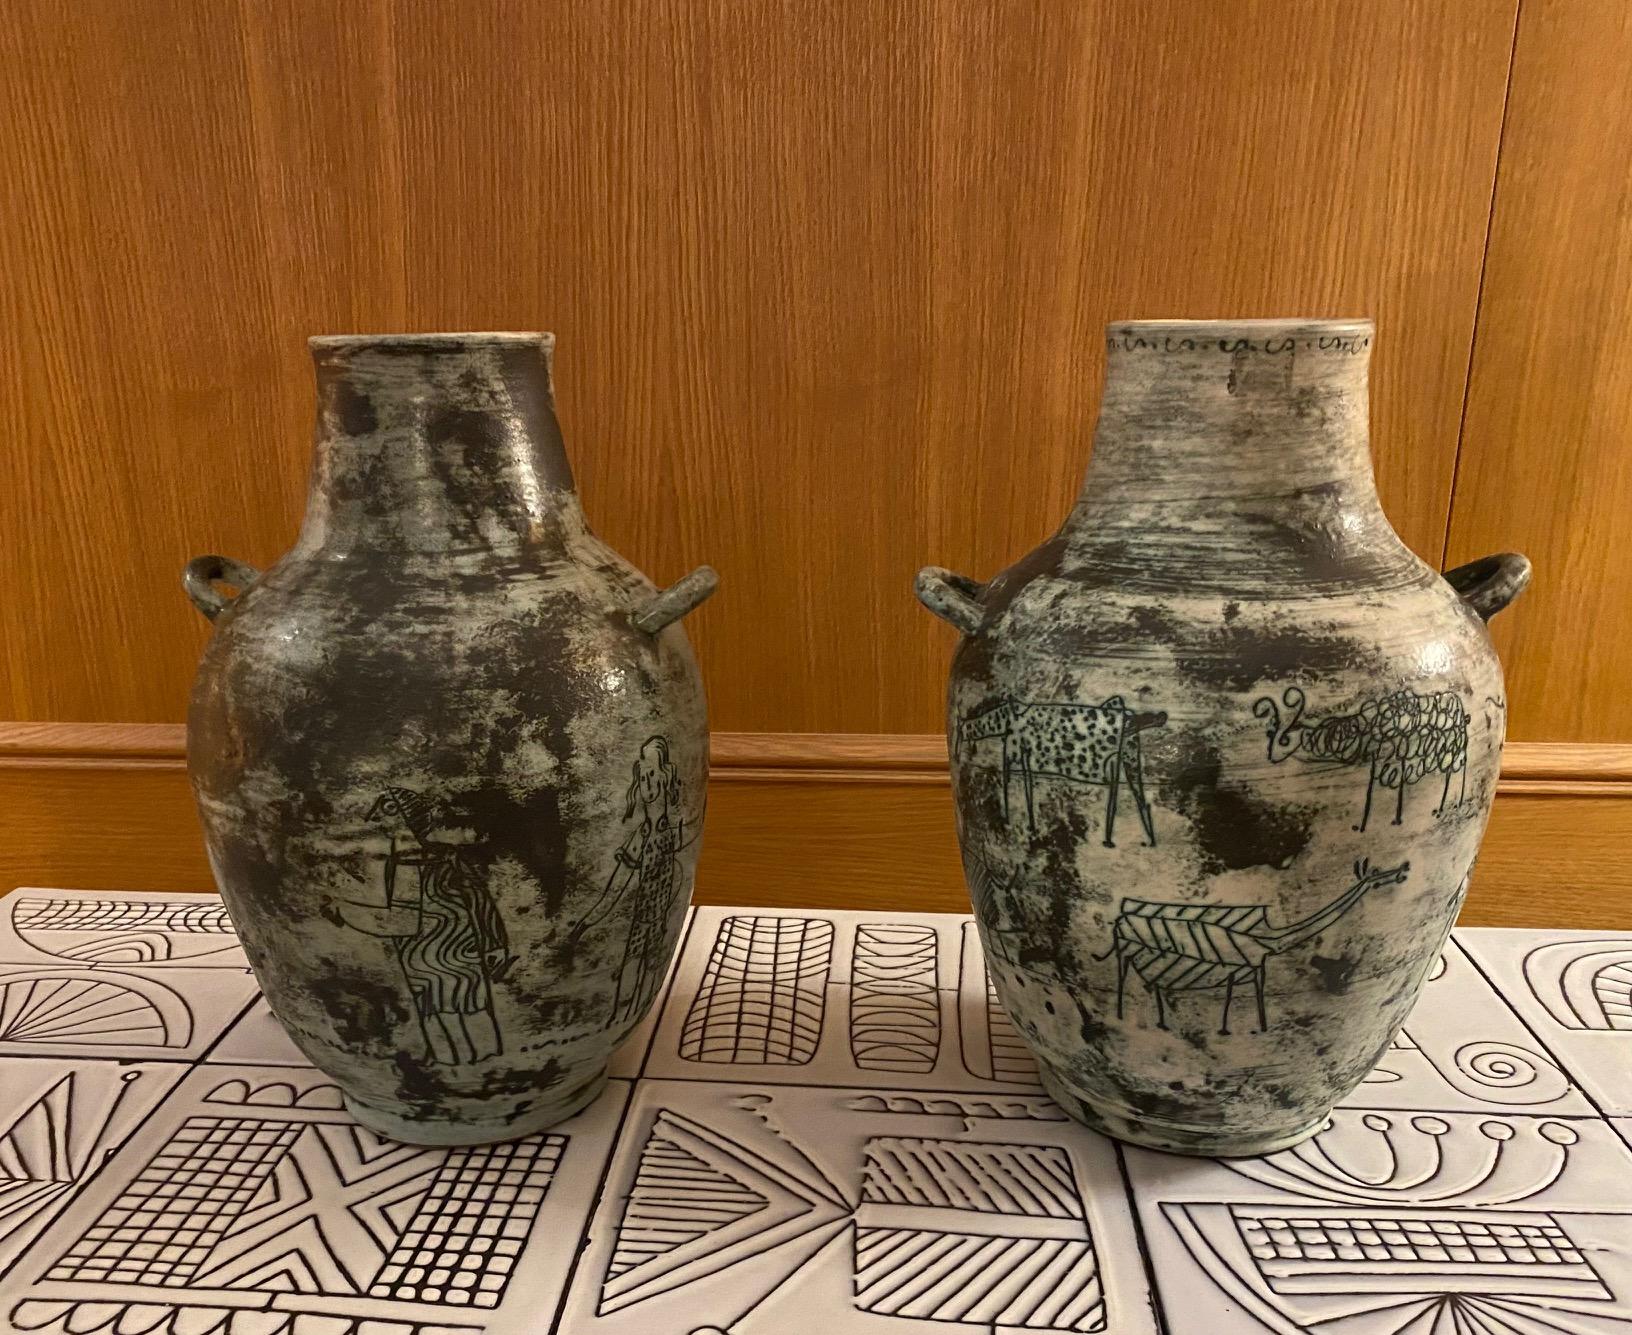 Pair of ceramic vases by Jacques Blin, France, 1960s
Decor of animals by Jean Rustin.
Similar forms reproduced in the book 